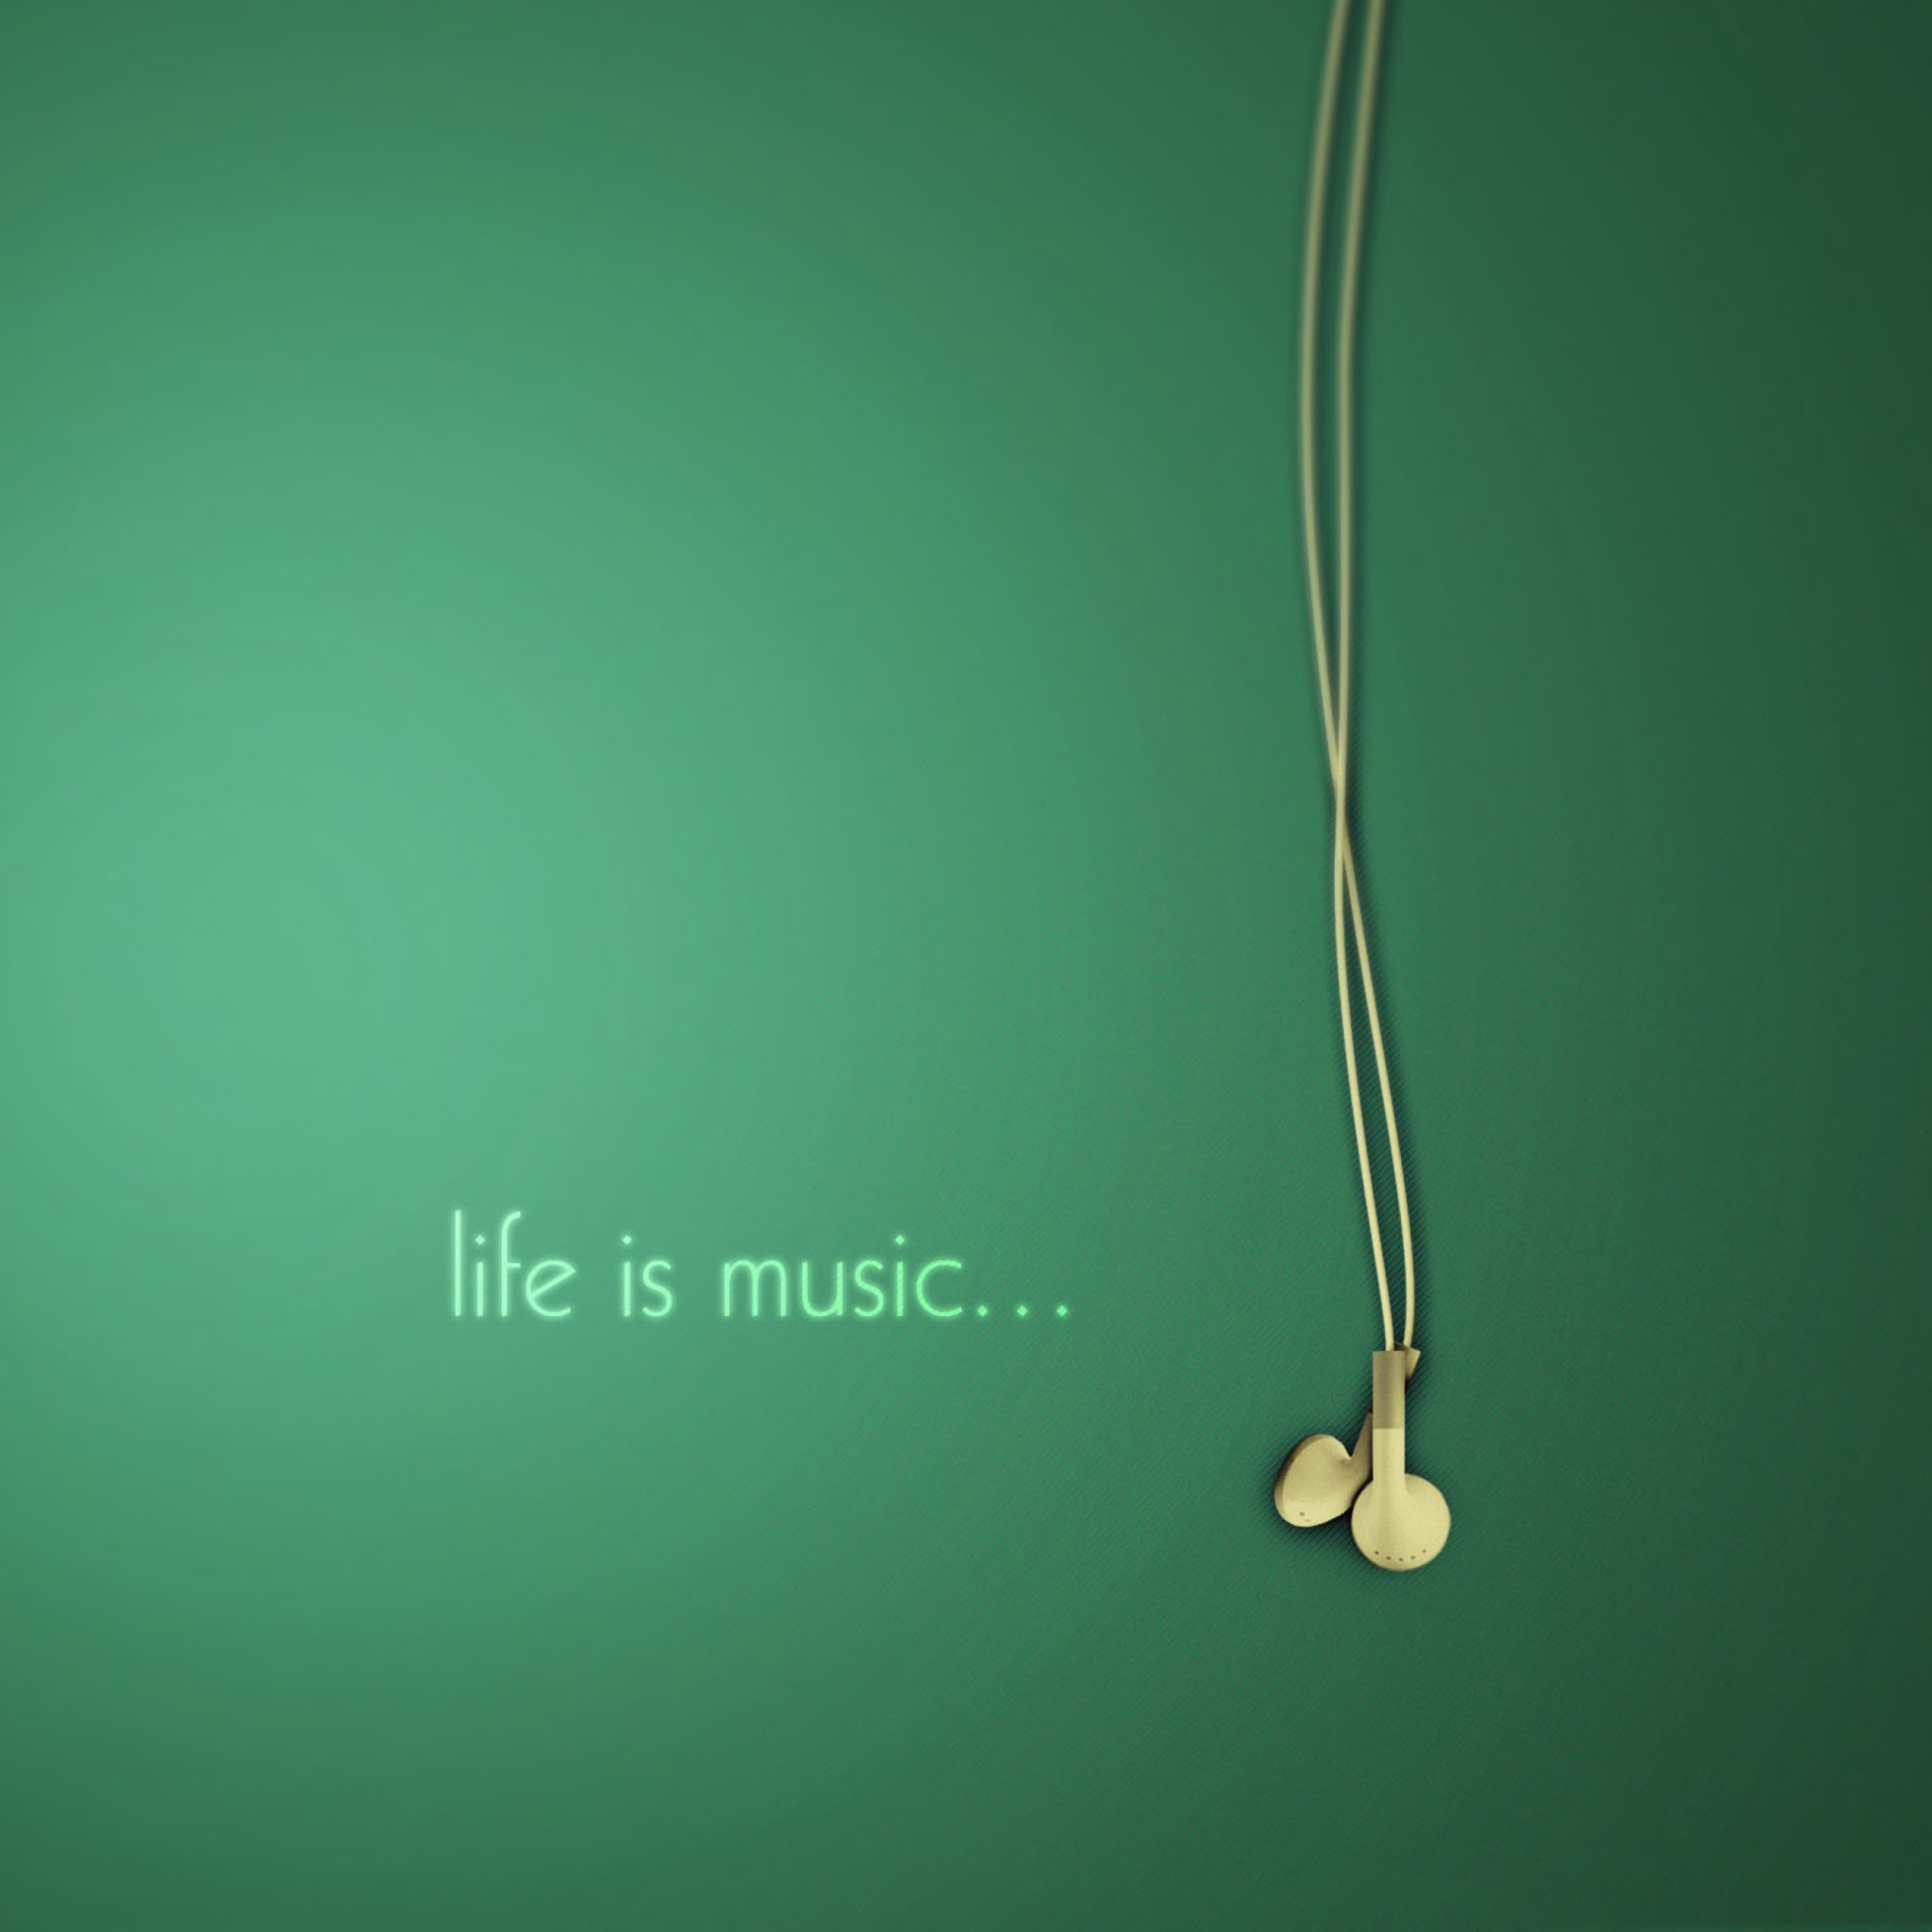 Life Is Music wallpaper 2048x2048